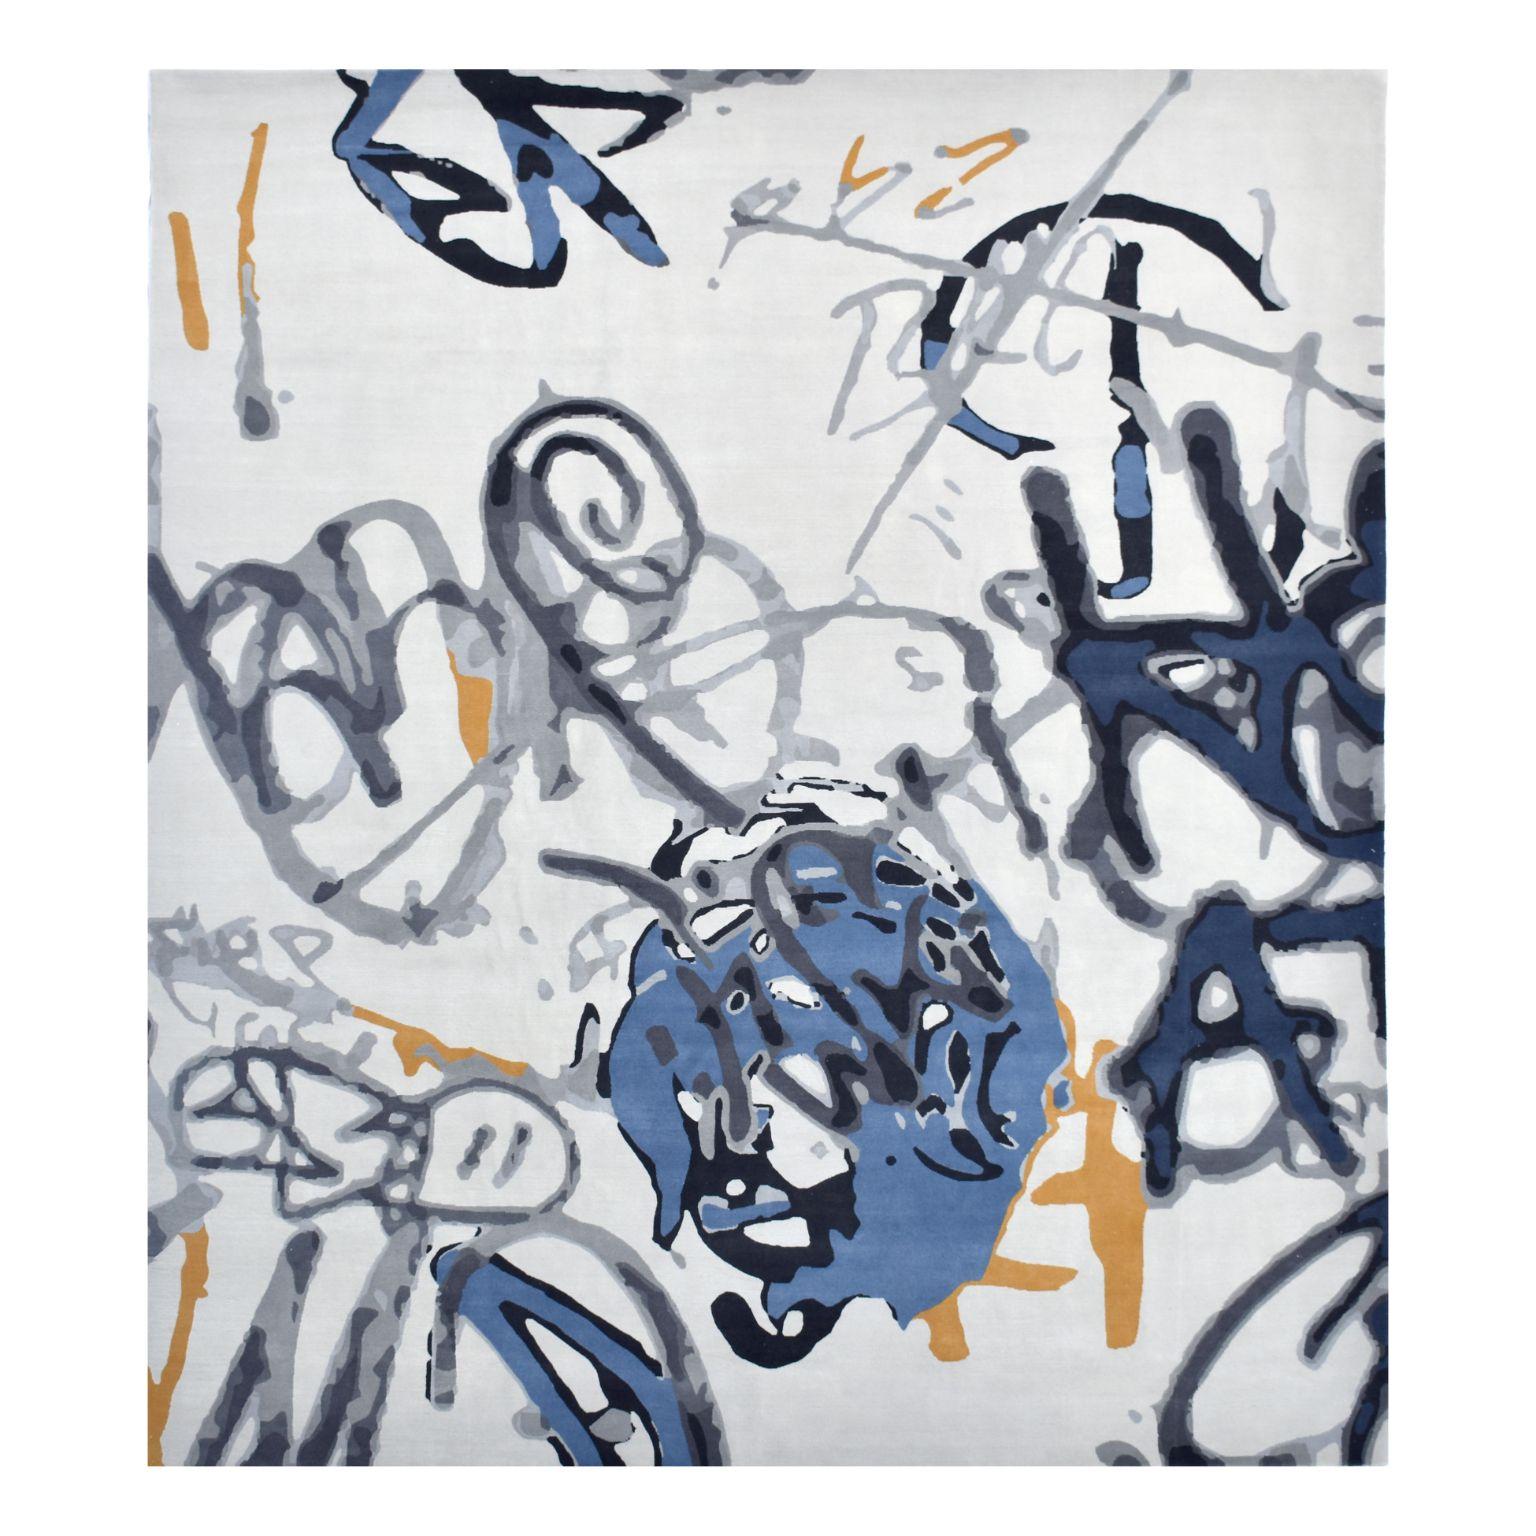 City Graffiti large rug by Art & Loom
Dimensions: D304.8 x H426.7 cm
Materials: 100% New Zealand wool
Quality (Knots per Inch): 100
Also available in different dimensions.

Samantha Gallacher has always had a keen eye for aesthetics, drawing